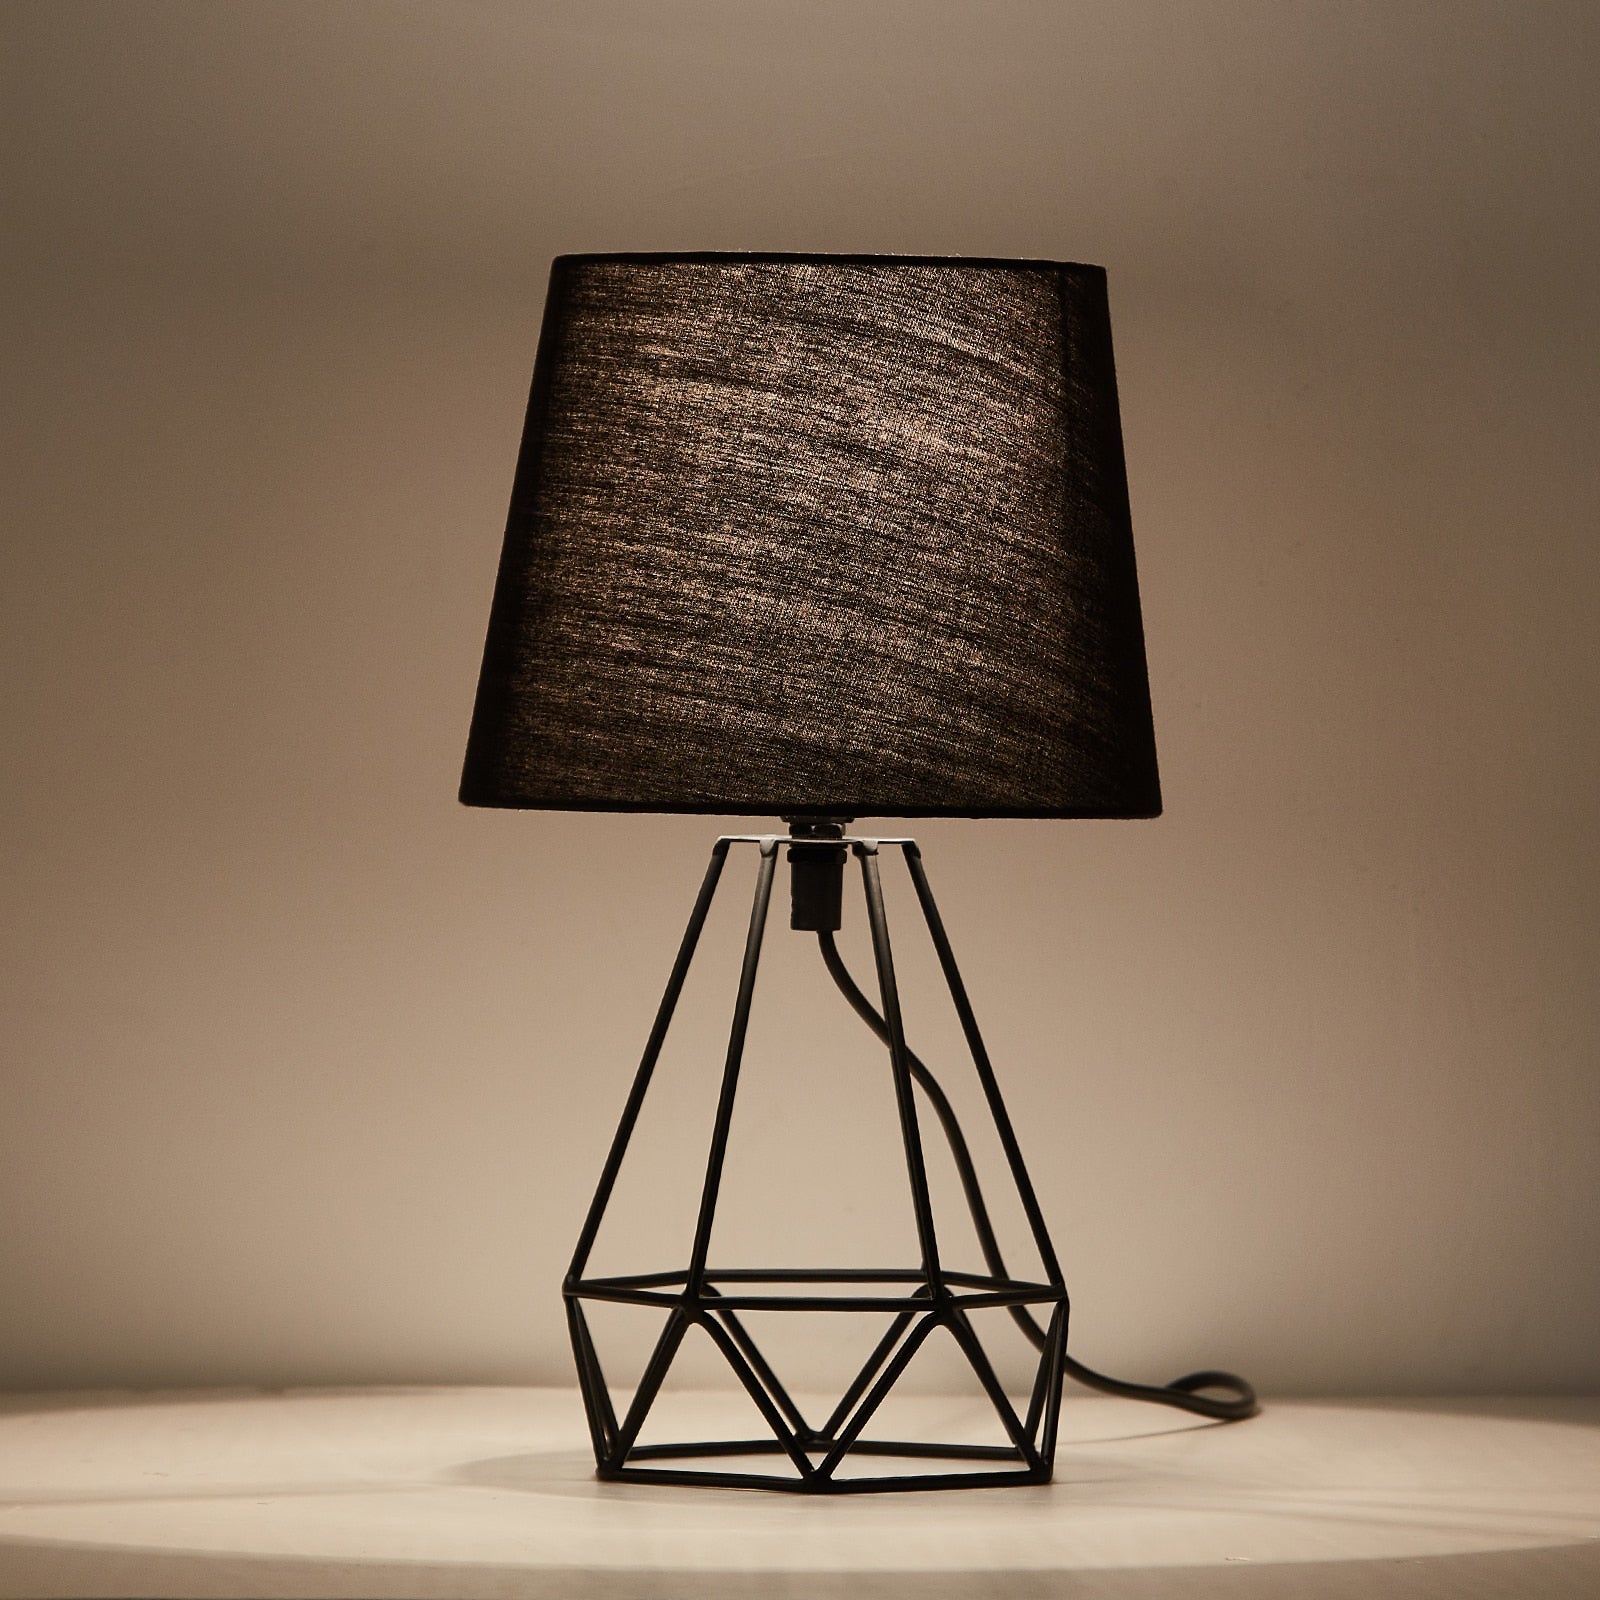 Modern Table Lamp with Geometric Metal Base & Fabric Shade 1, Desk Light Lamp for Bedroom Living Room Besontique